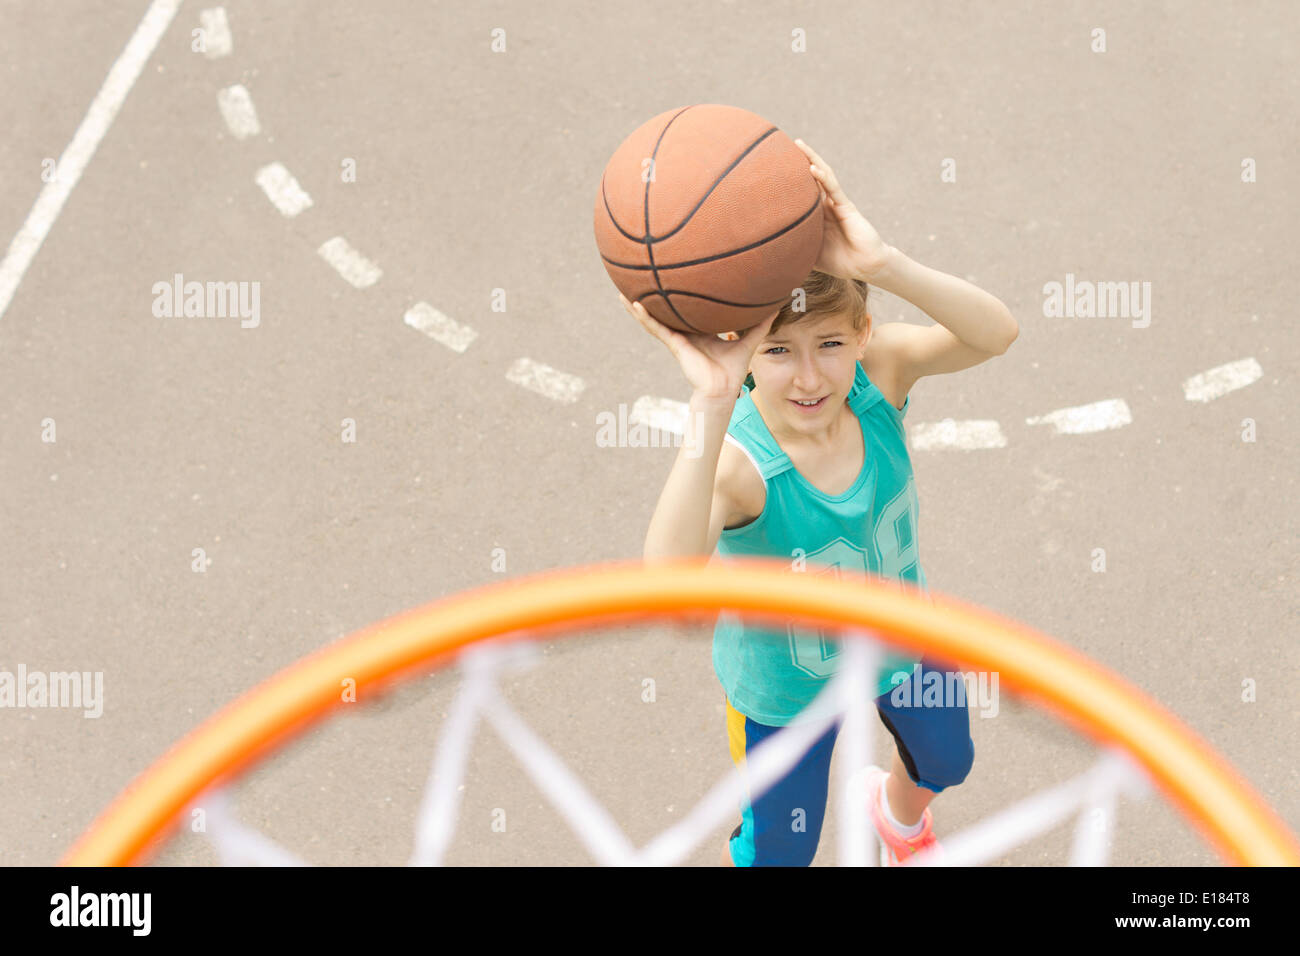 Young girl taking aim at the goal on a basketball court standing with the  ball raised aiming at the hoop Stock Photo - Alamy